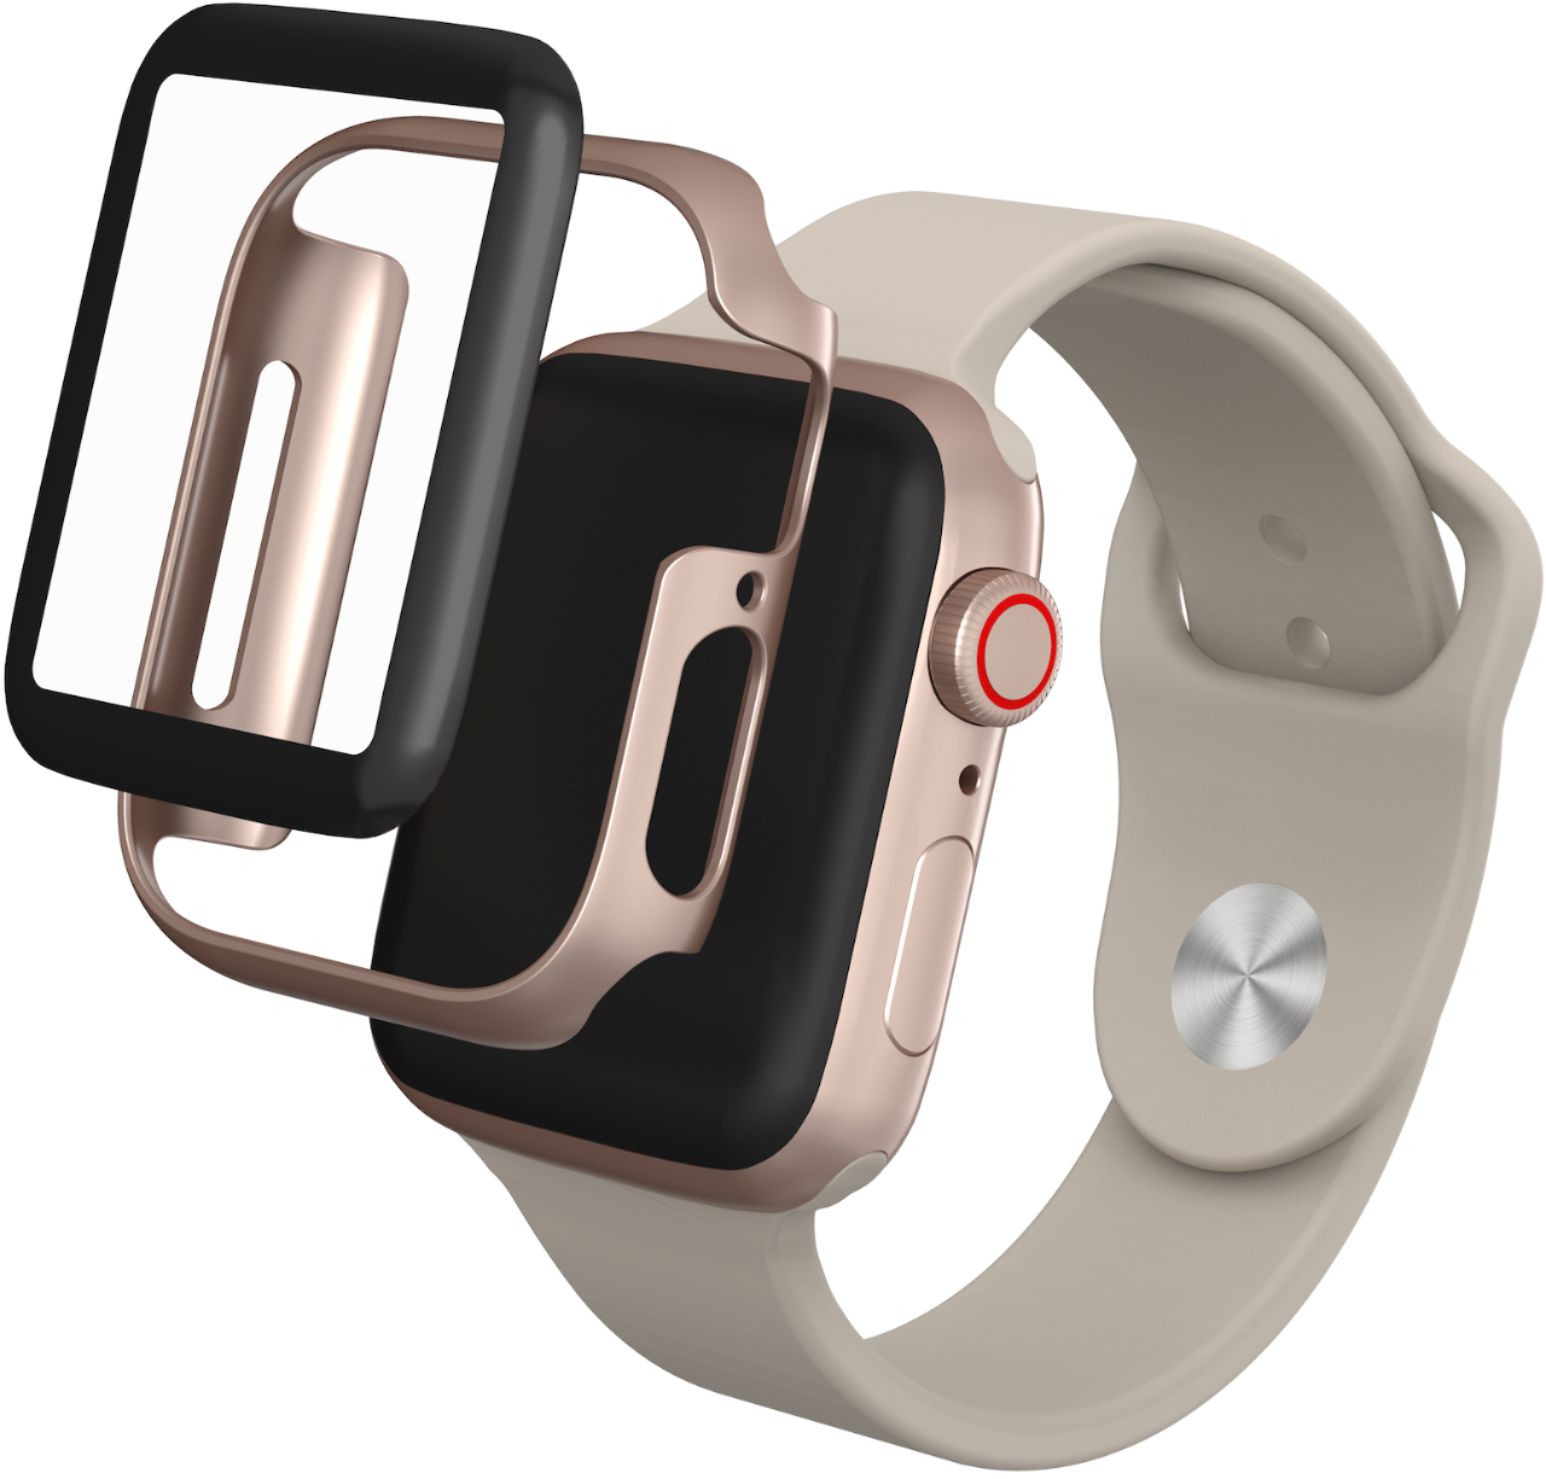 ZAGG - InvisibleShield GlassFusion 360 Screen Protector for Apple Watch ...